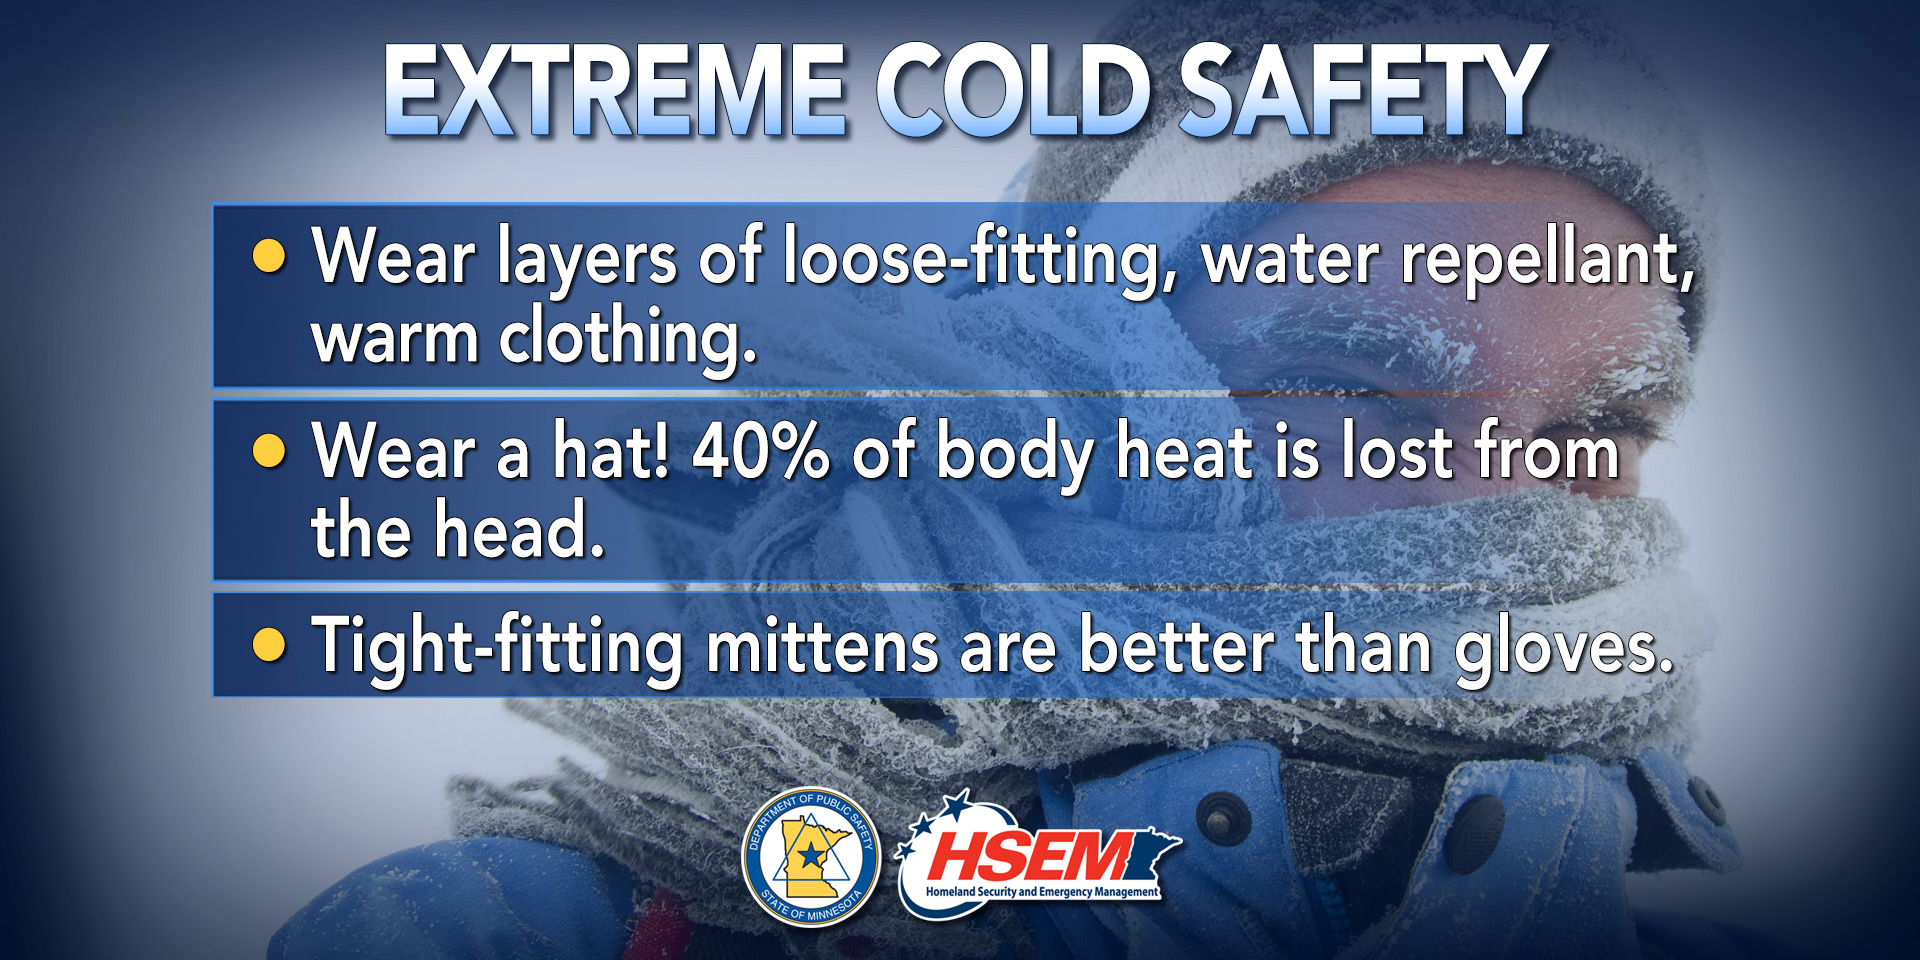 Extreme cold safety tips